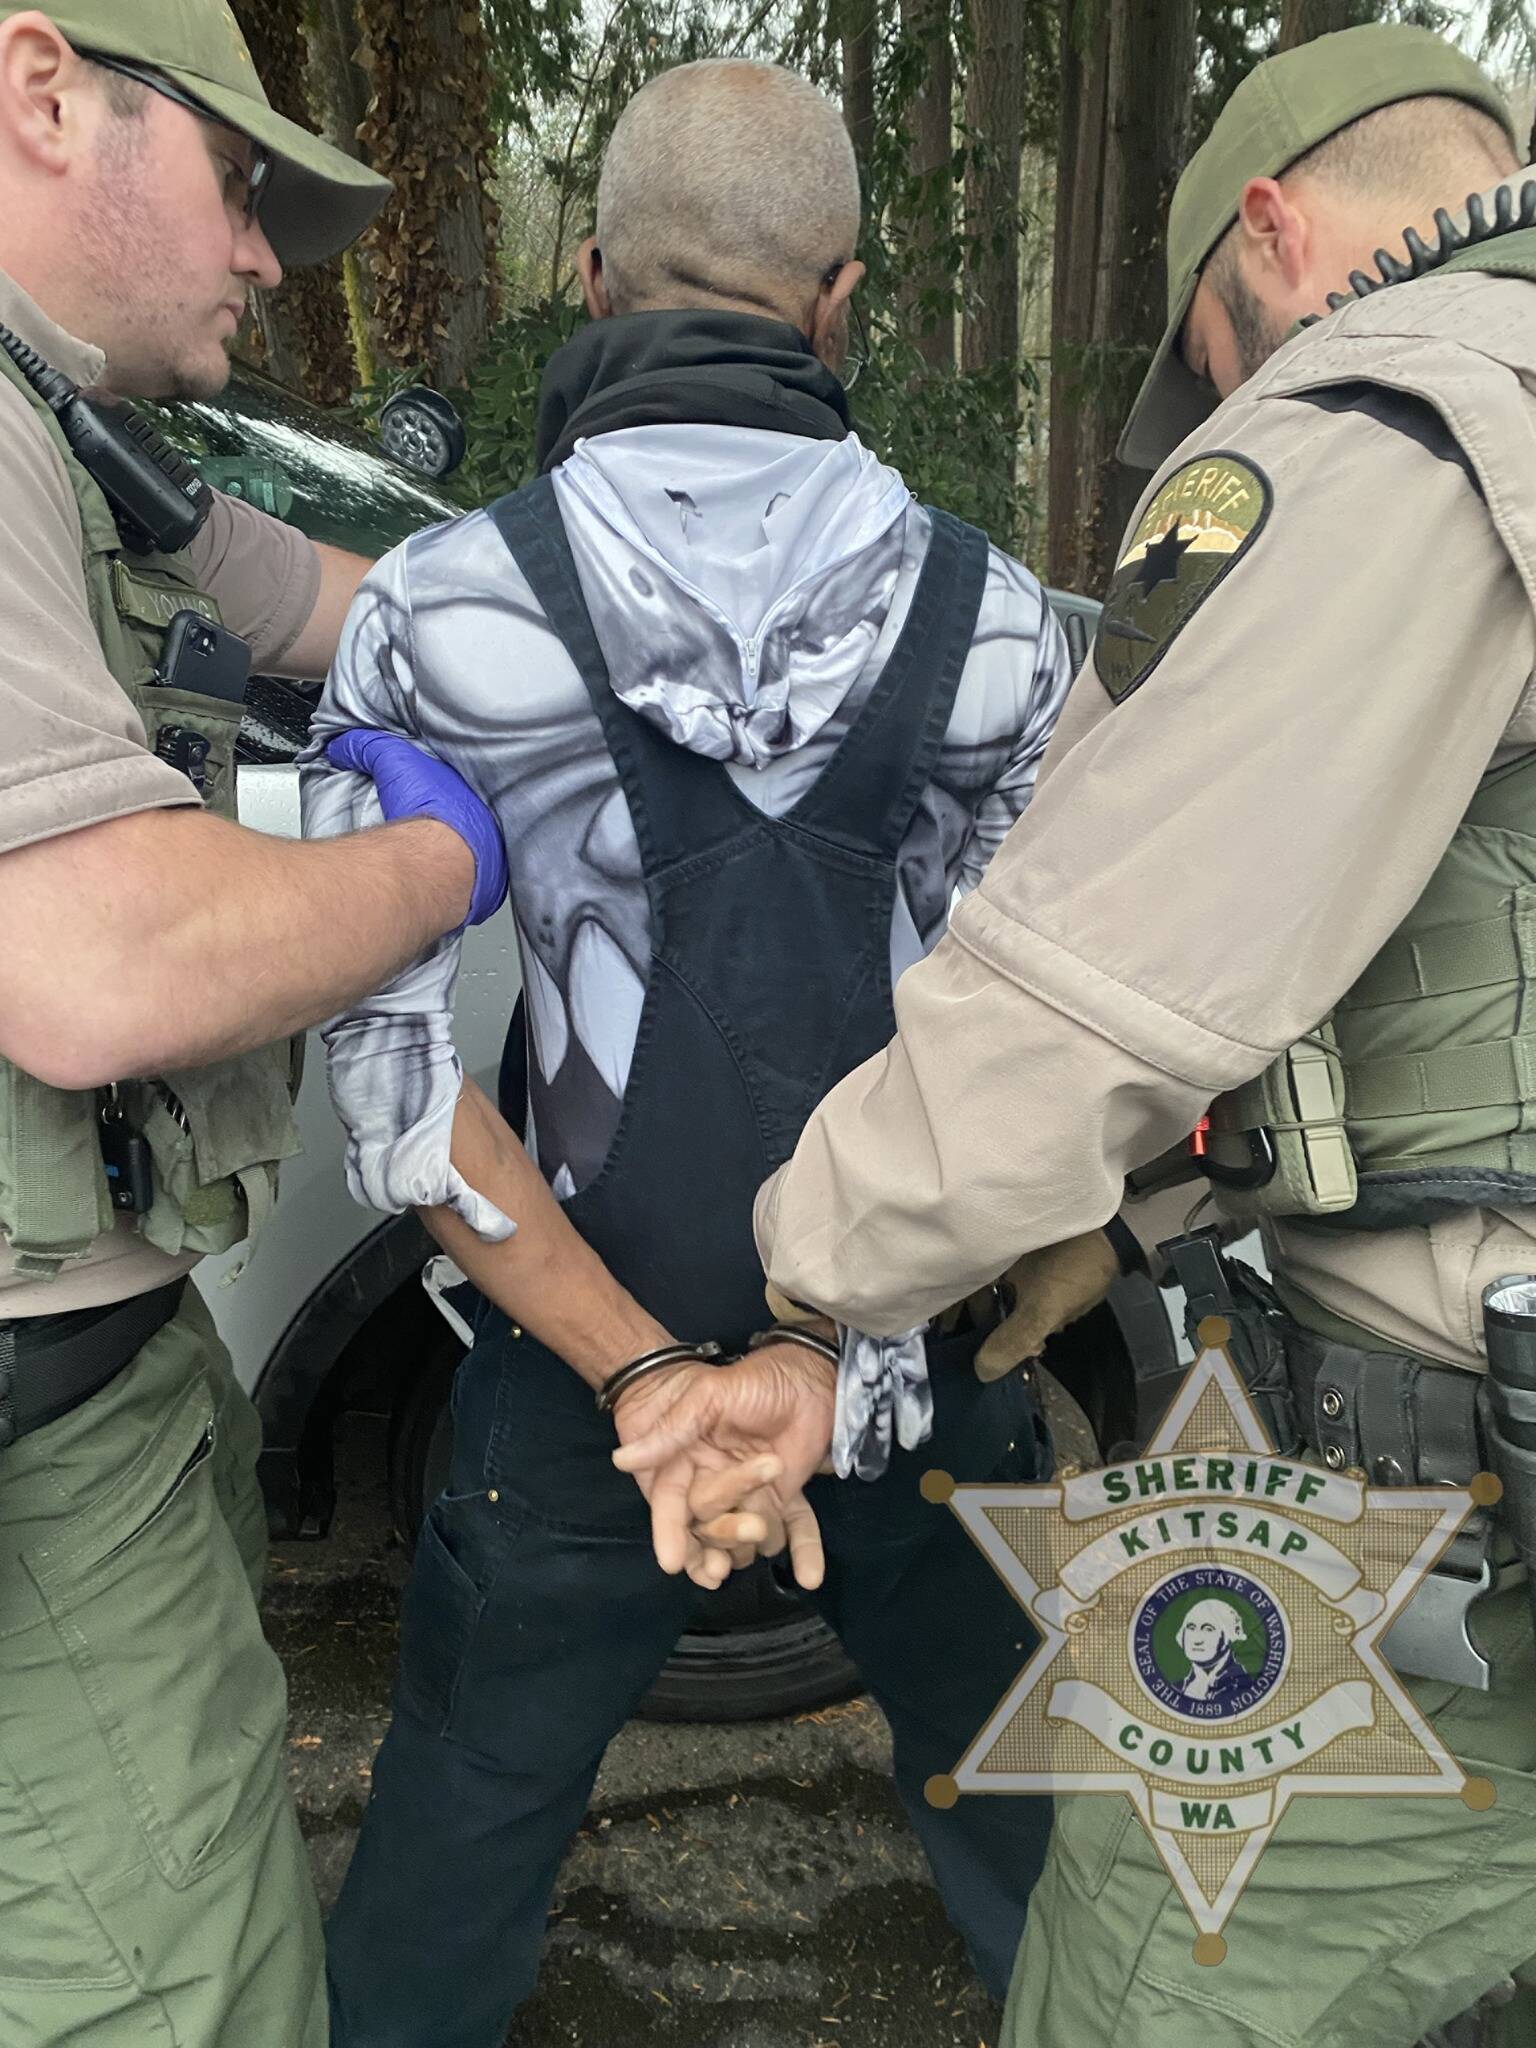 KCSO courtesy photo
Law enforcement arrests Charles Edward Key who was wanted in connection to the murder of a 43-year-old woman.